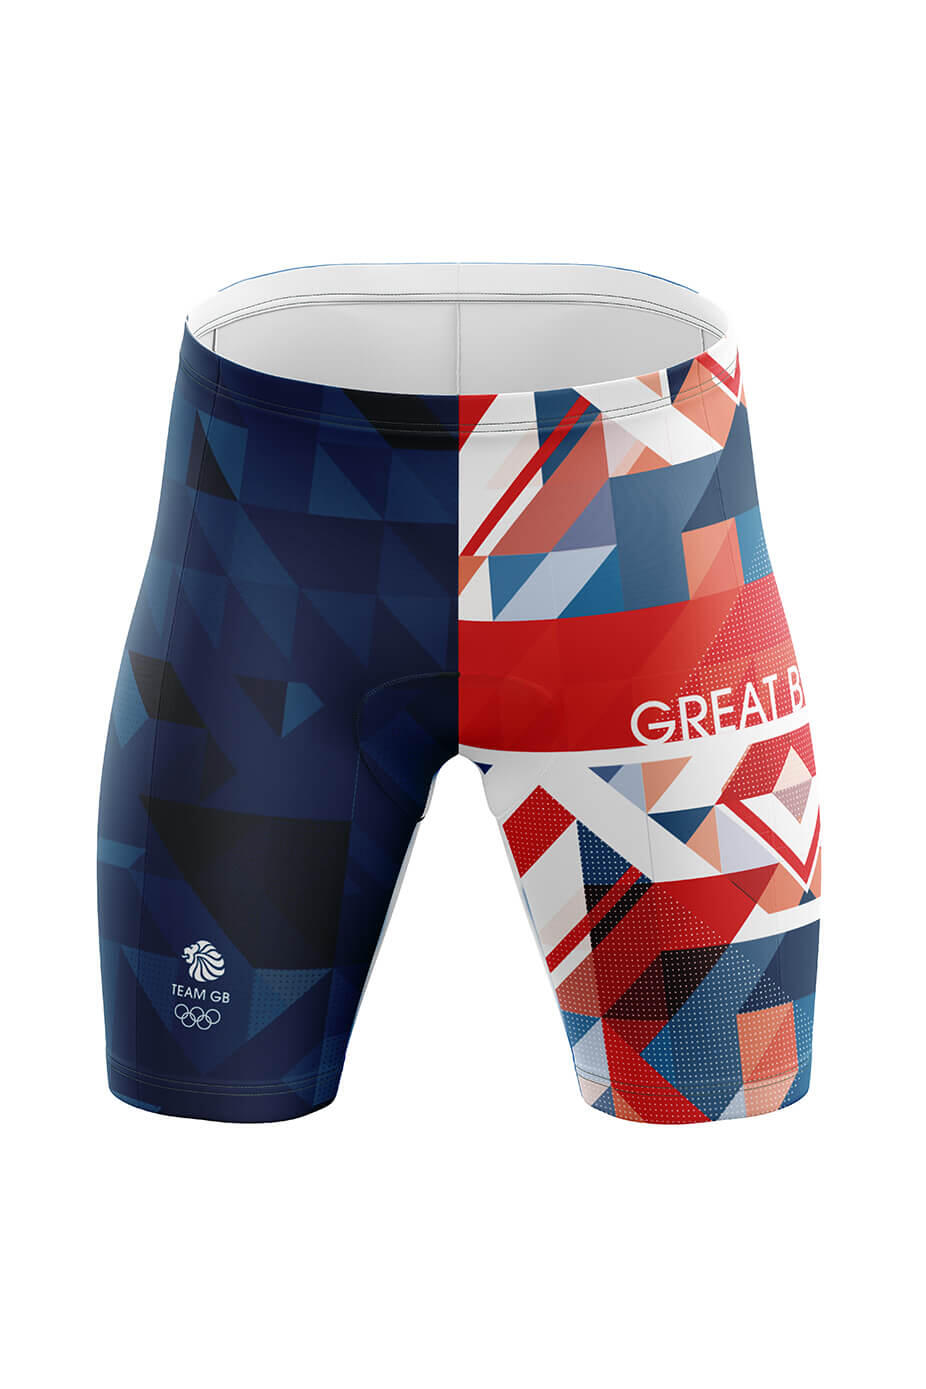 SWIMZI TEAM GB Male Training Jammer - Red, White and Blue.